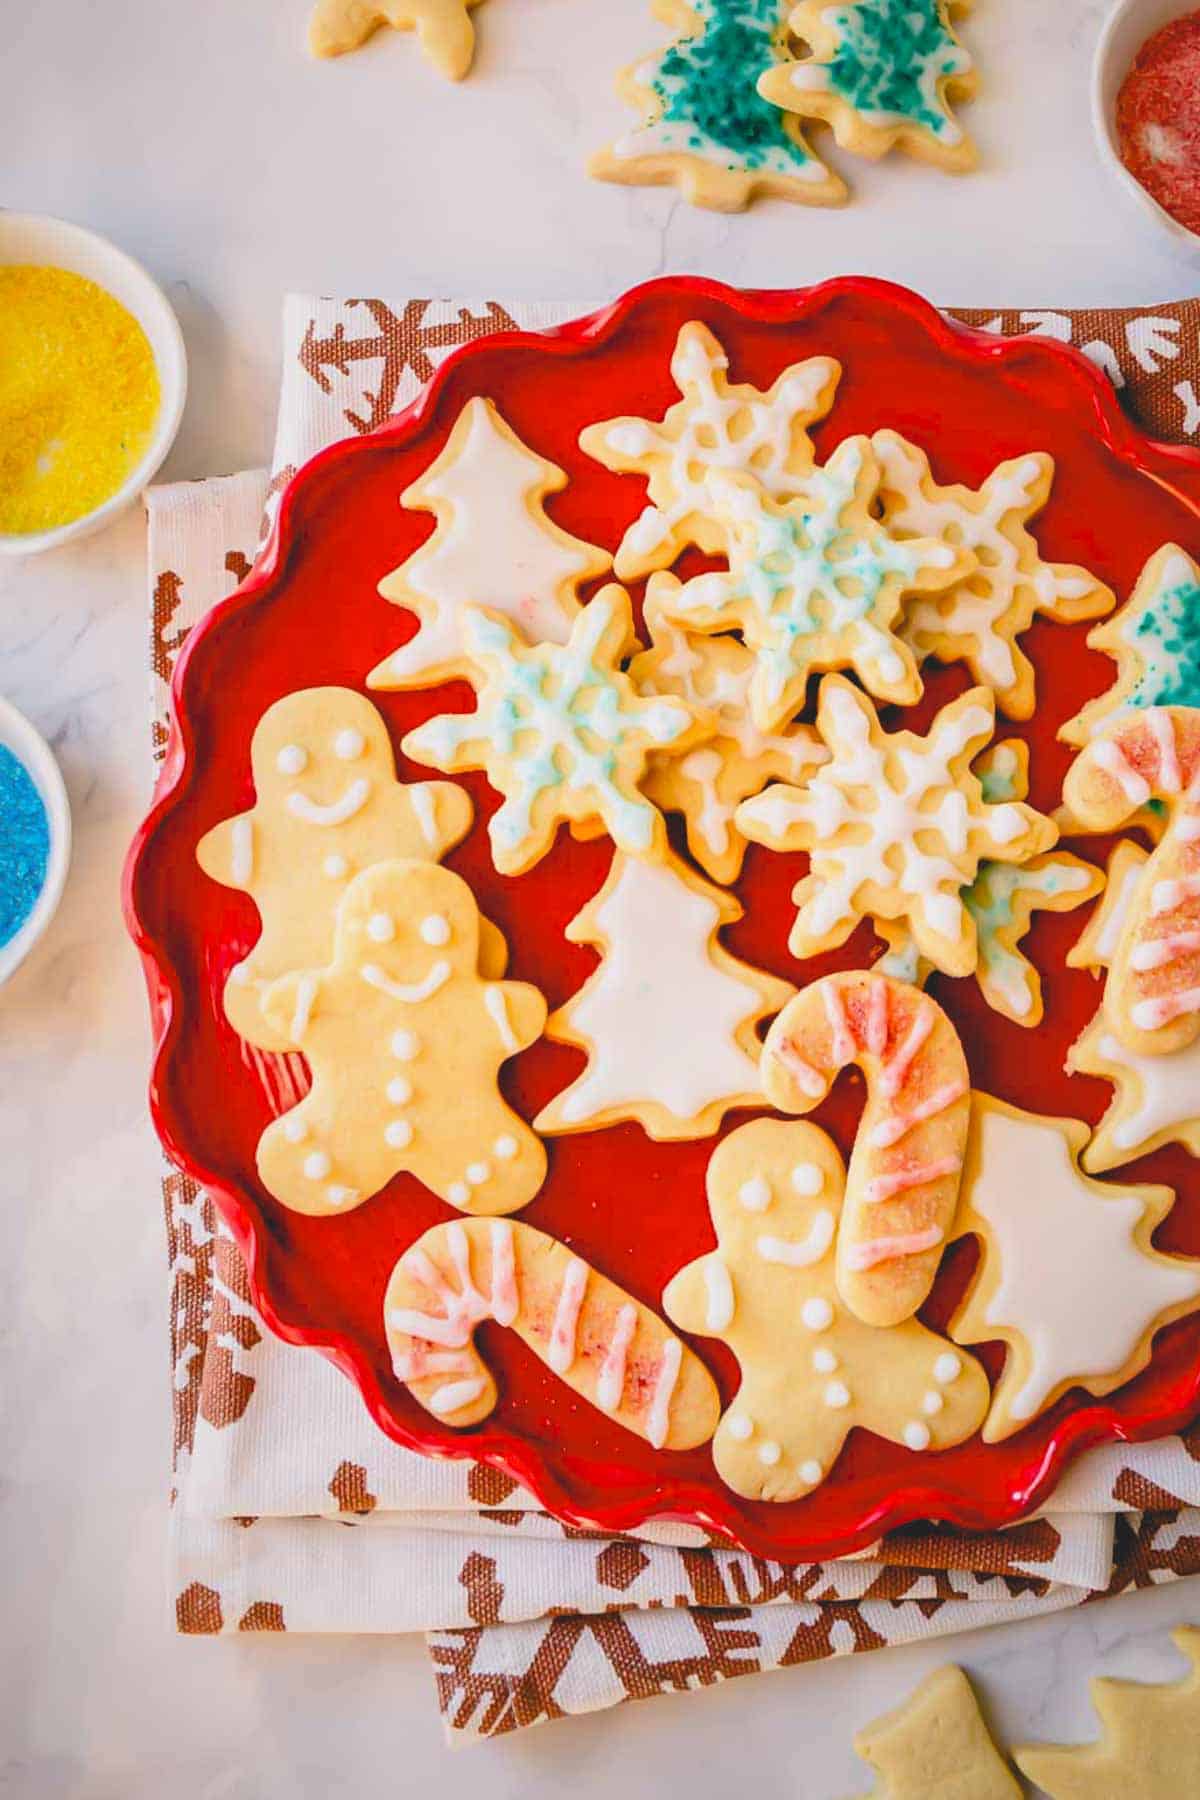 A red plate full of decorated christmas sugar cookies.